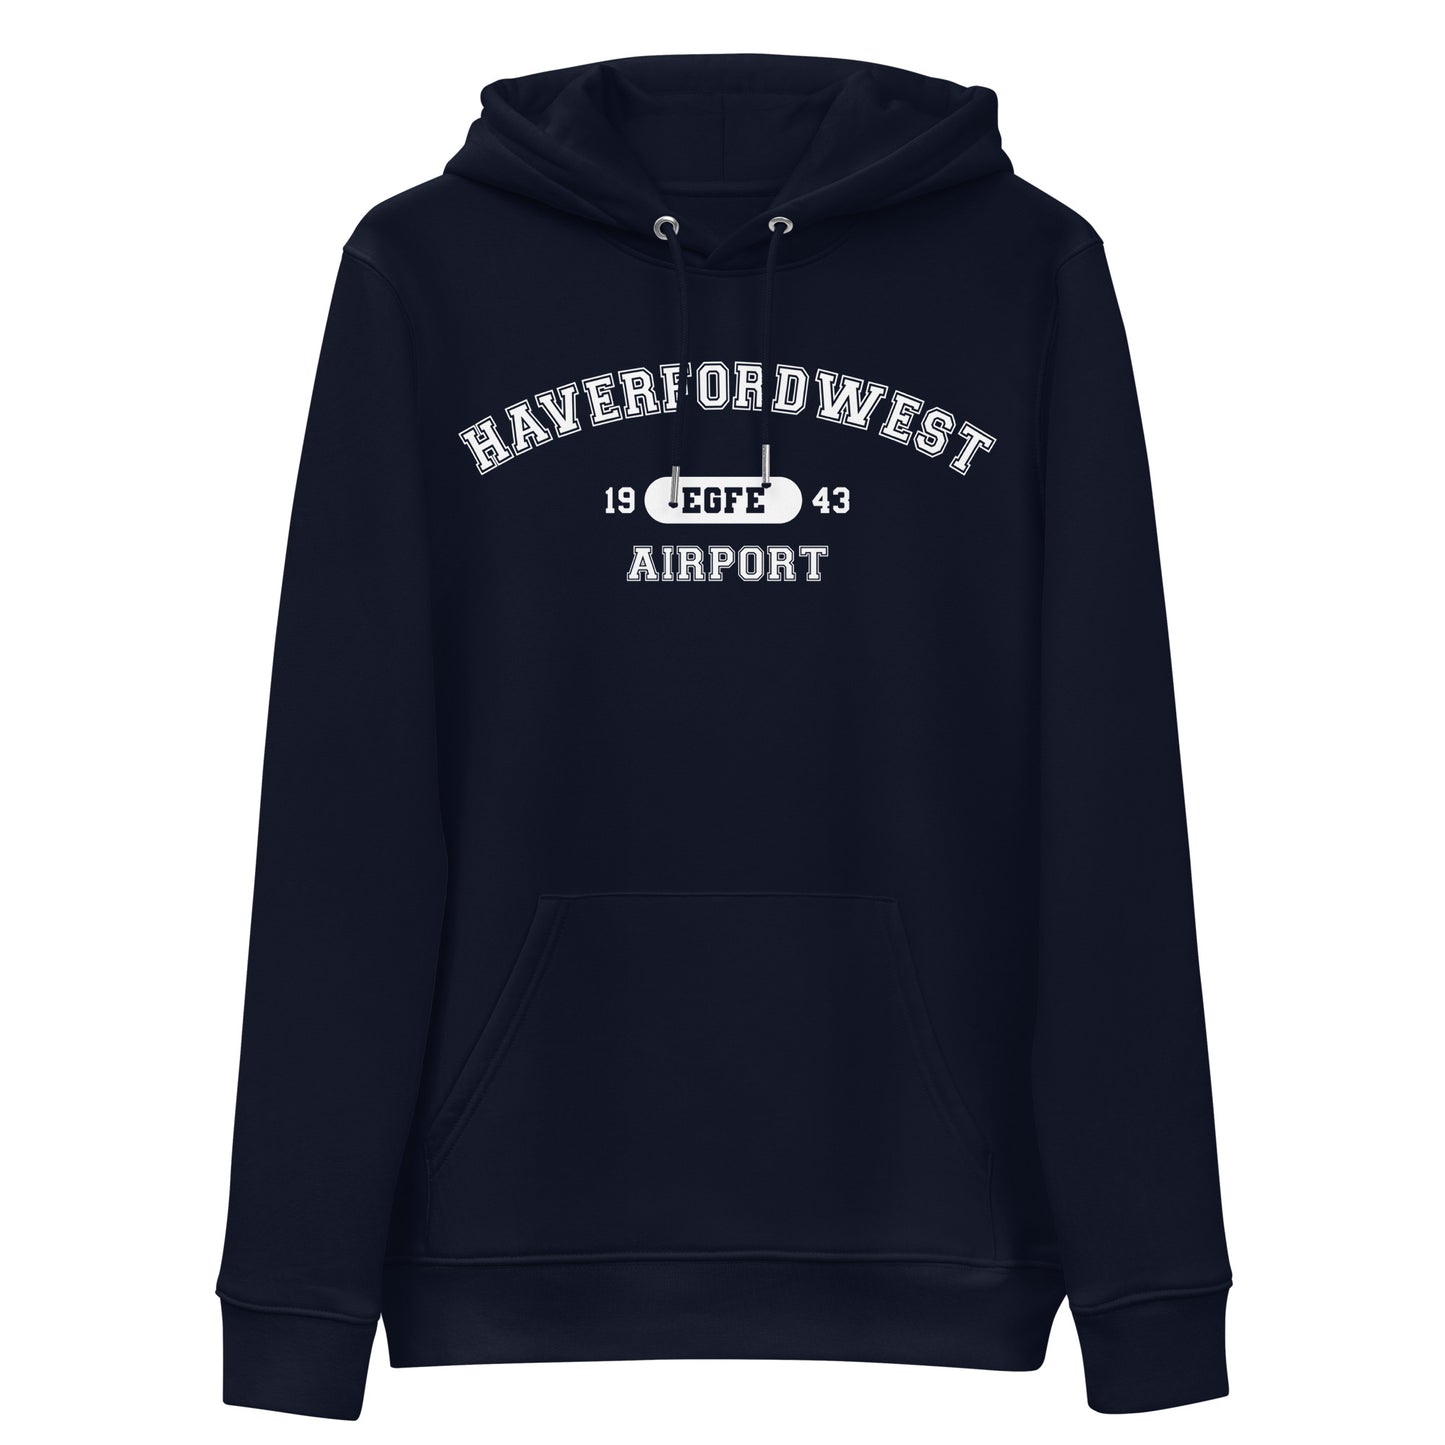 Navy blue Haverfordwest Airport collegiate heavyweight hoodie features a classic collegiate style print with the airport's name, ICAO code and date of construction on the front.